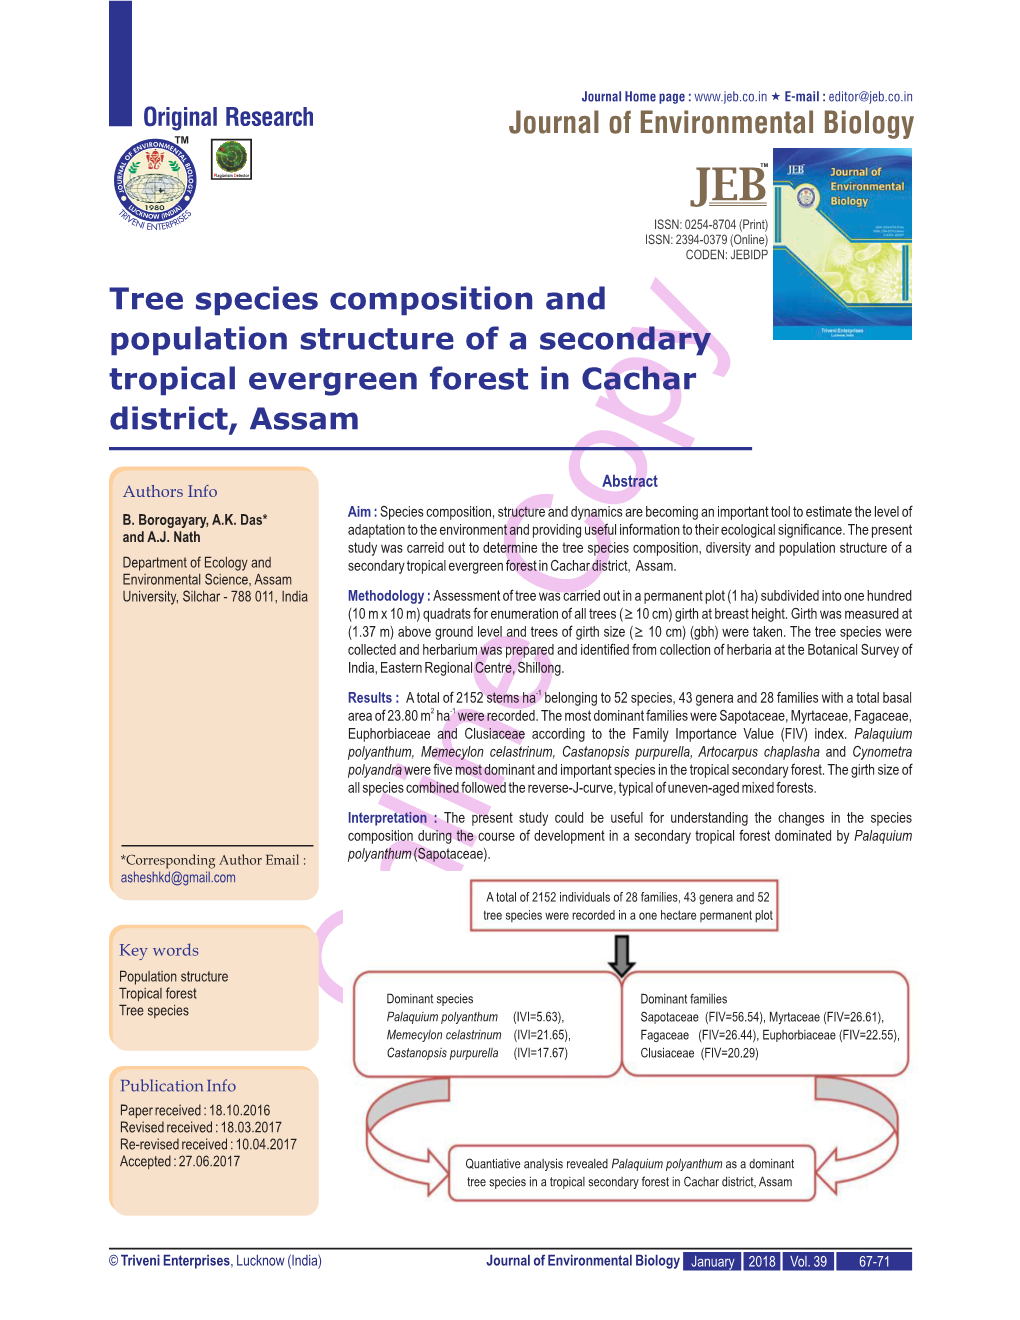 Journal of Environmental Biology Tree Species Composition And